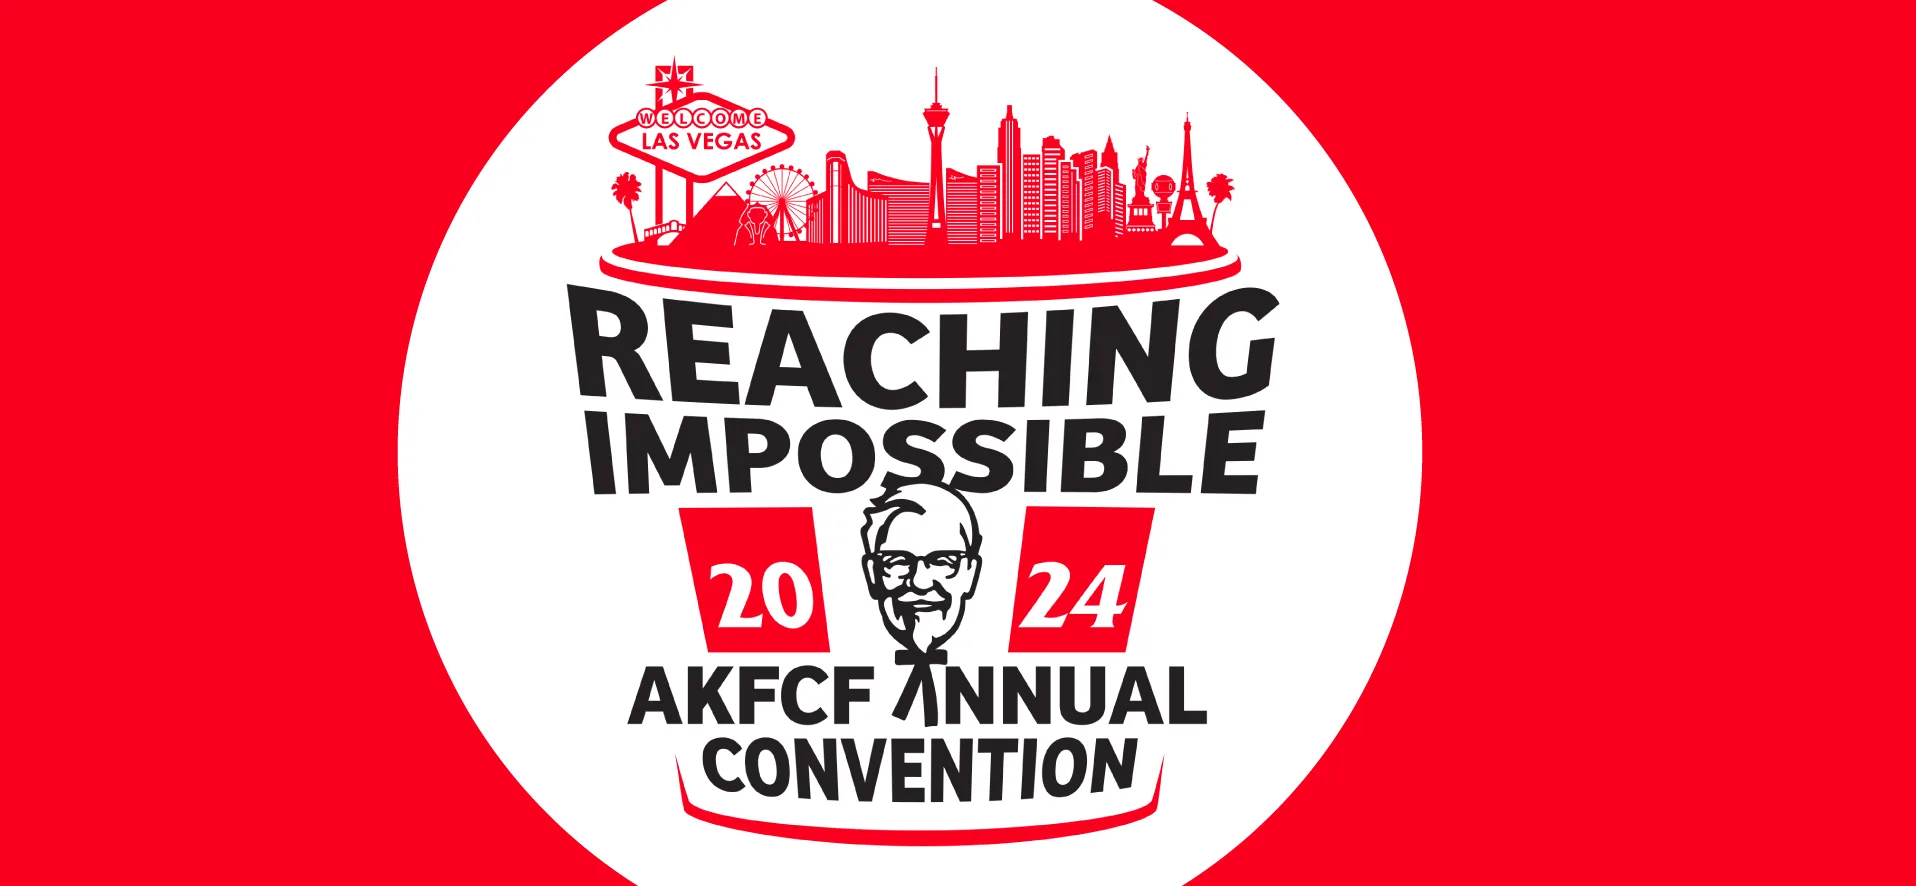 Reaching Impossible AKFCF Annual Convention